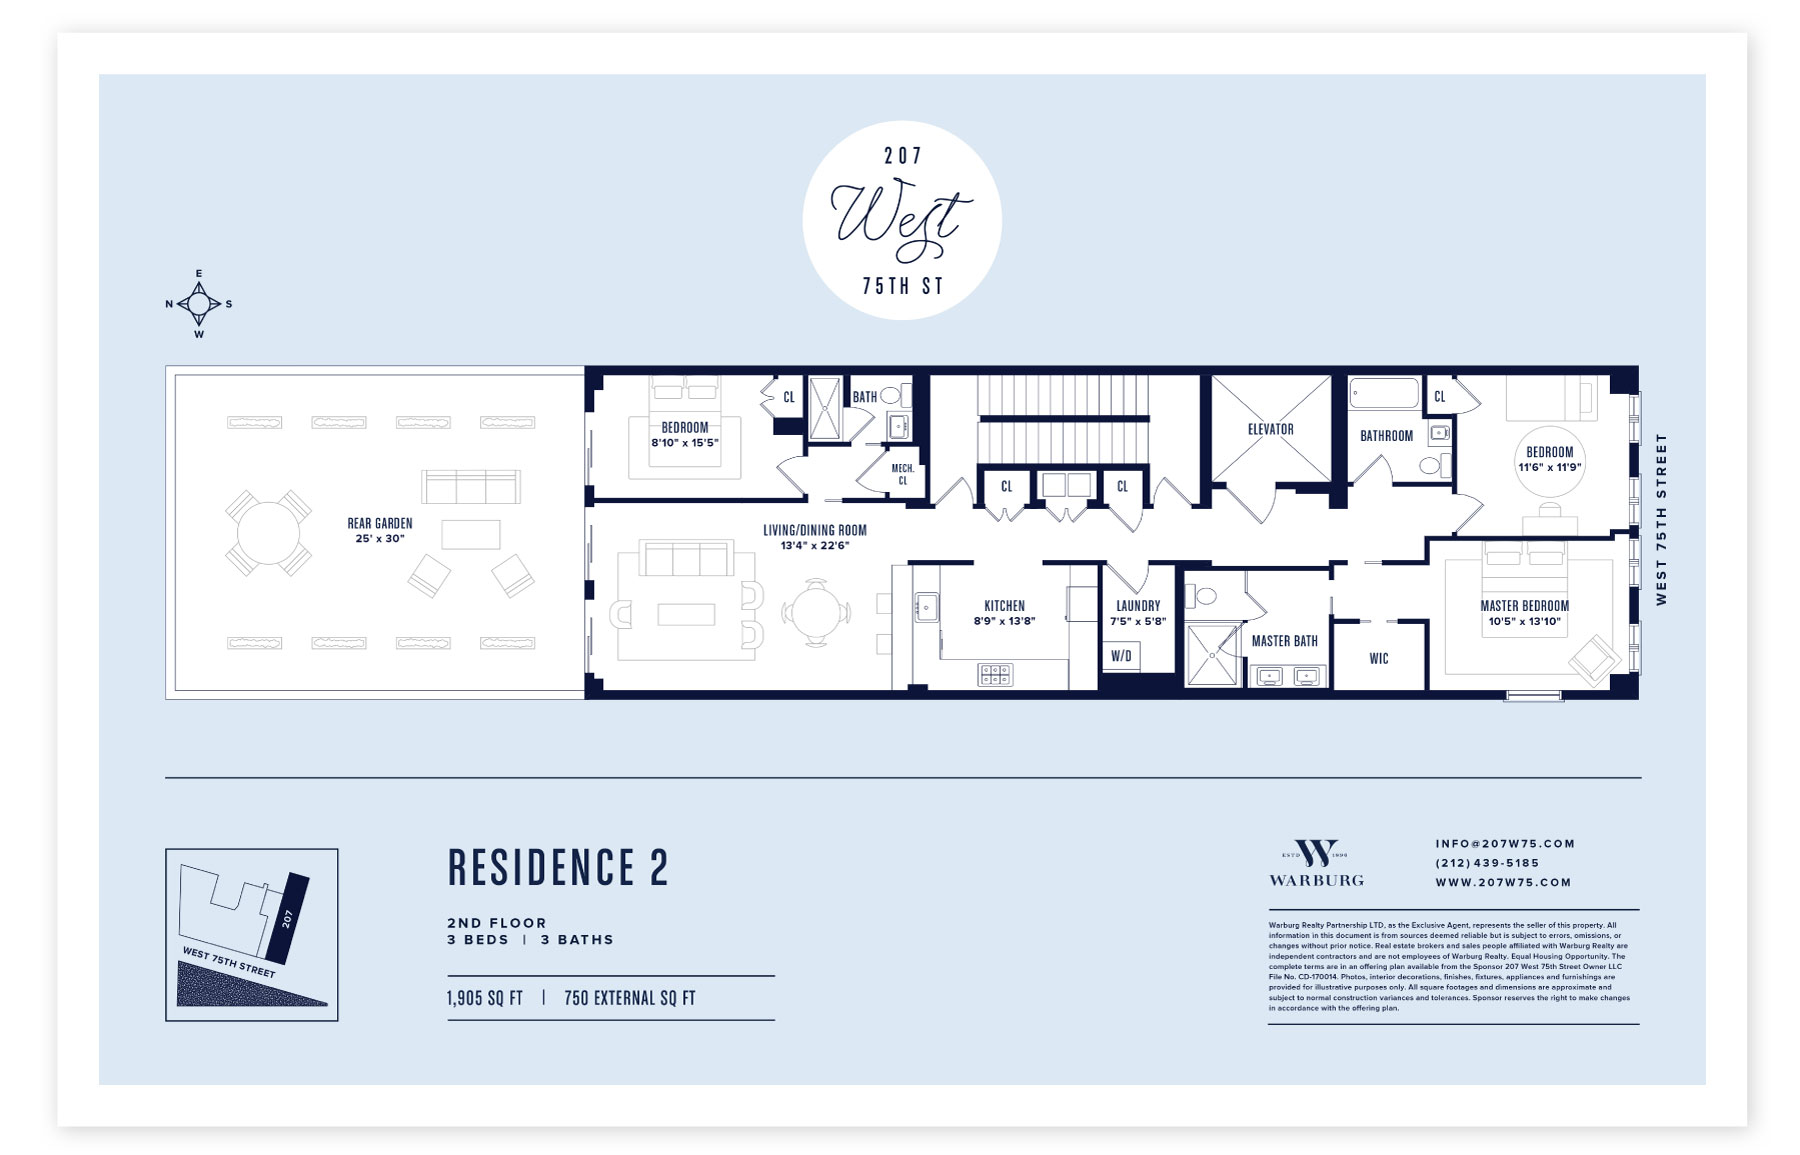 Line drawing of floorplans of residence 2